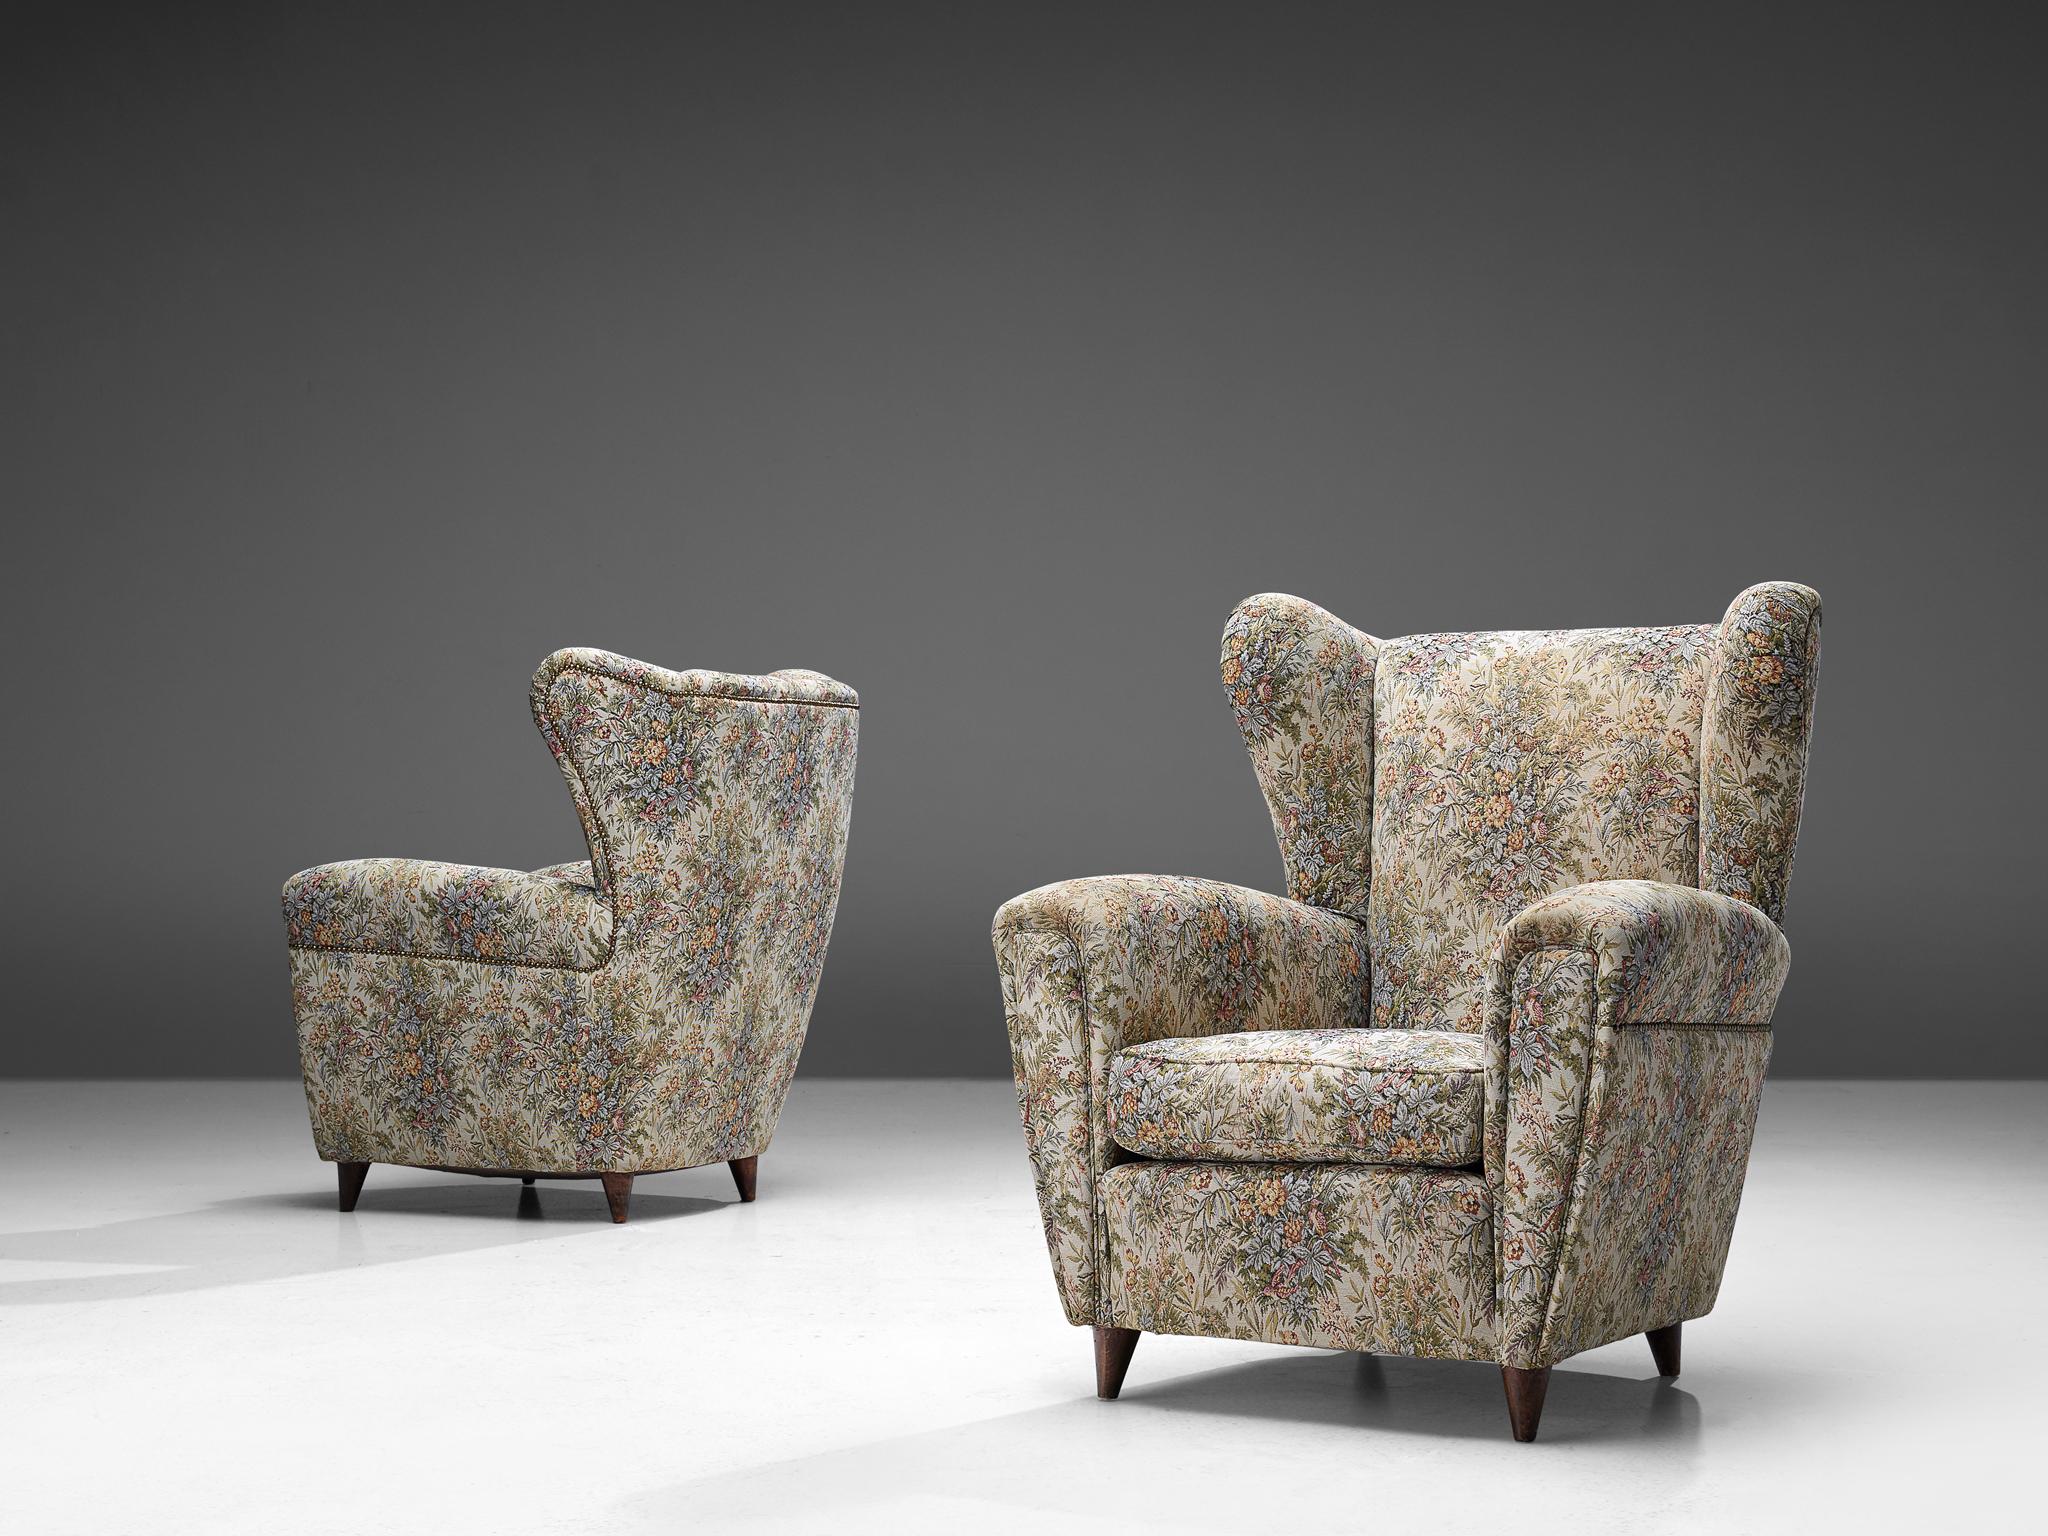 Large wingback armchairs, multicolored fabric upholstery, and wood, Italy, 1950s.

This classic Italian wingback armchair has a round shape that emphasizes its comfortableness. It has a high back and gracious wings that contains dramatized pointed